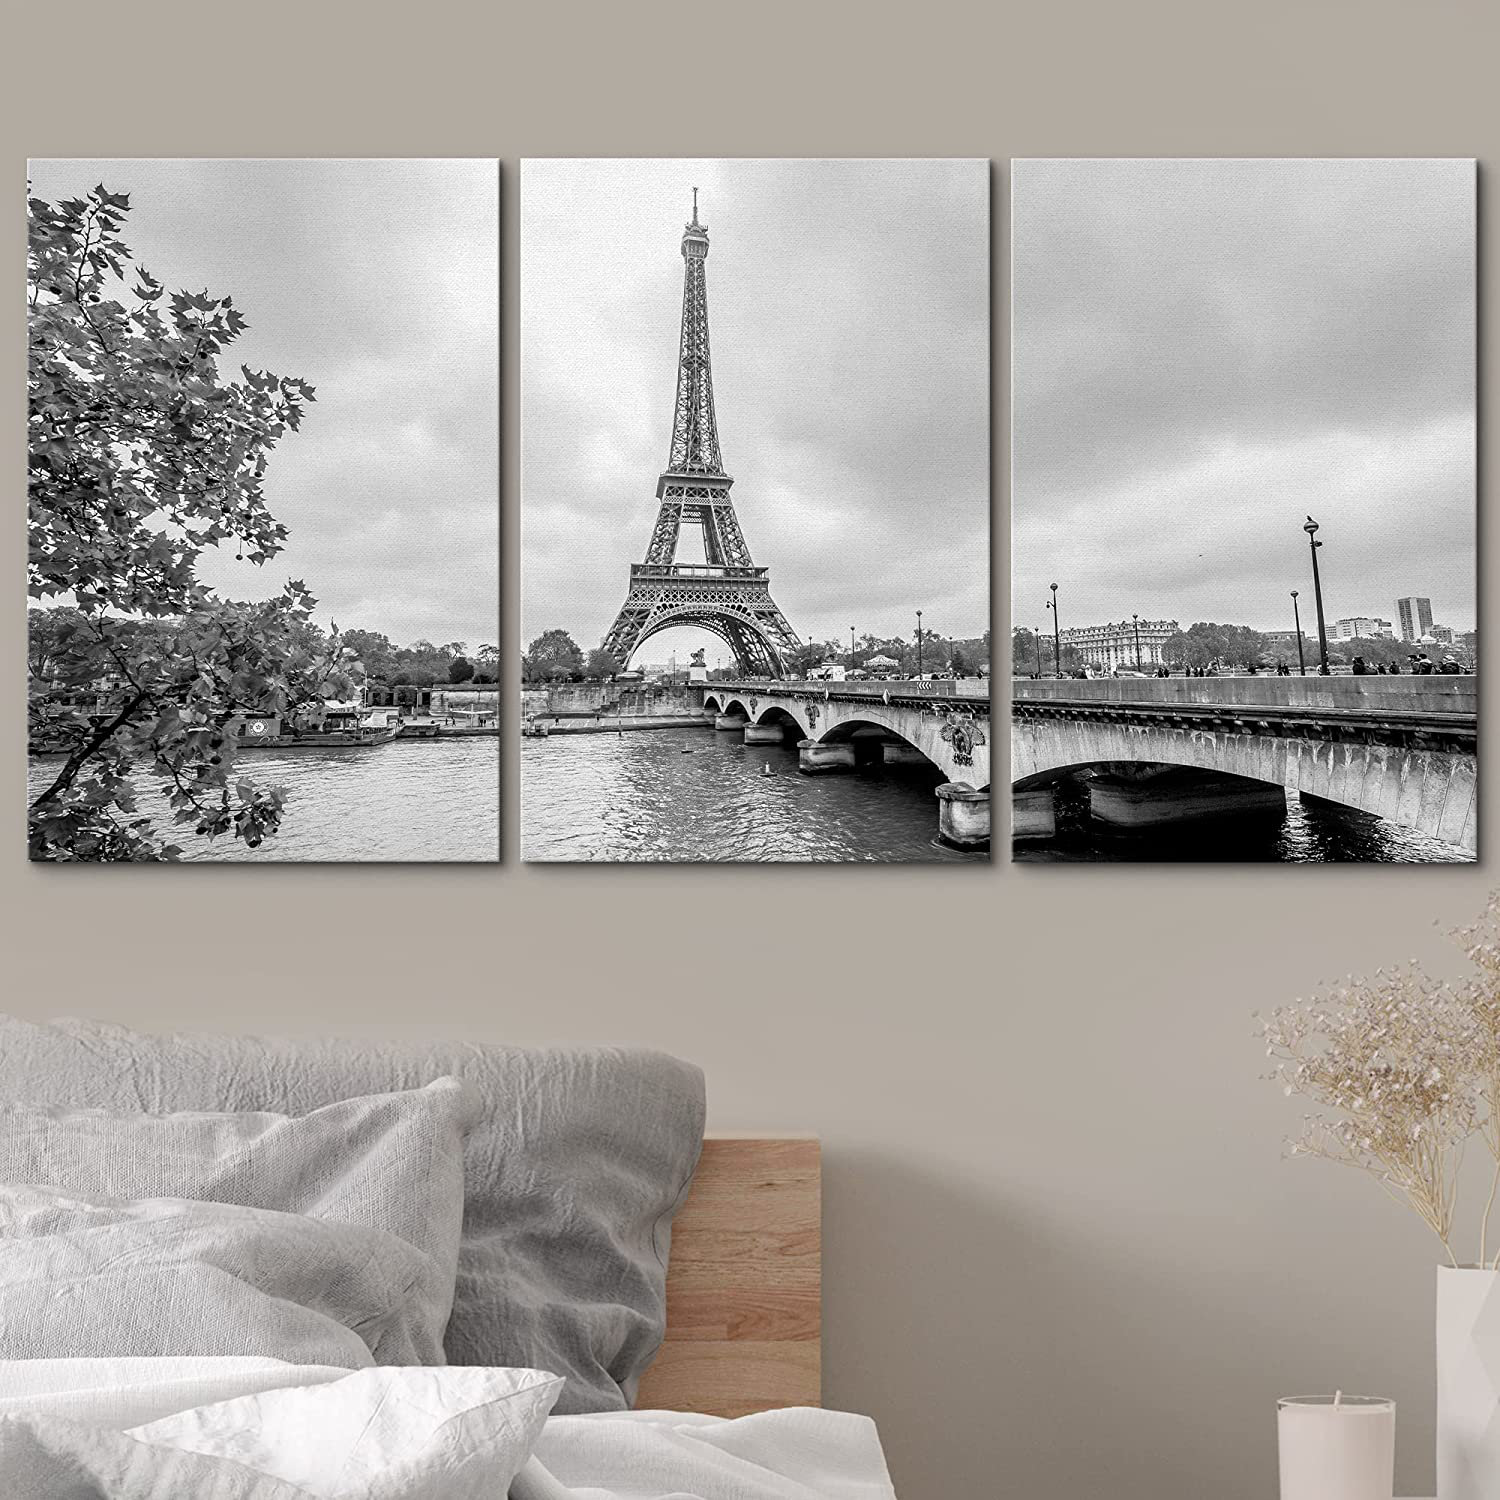 Canvas Print Cityscape Black Seine. And | Wayfair IDEA4WALL White 3 On In From Paris Eiffel Tower Pieces